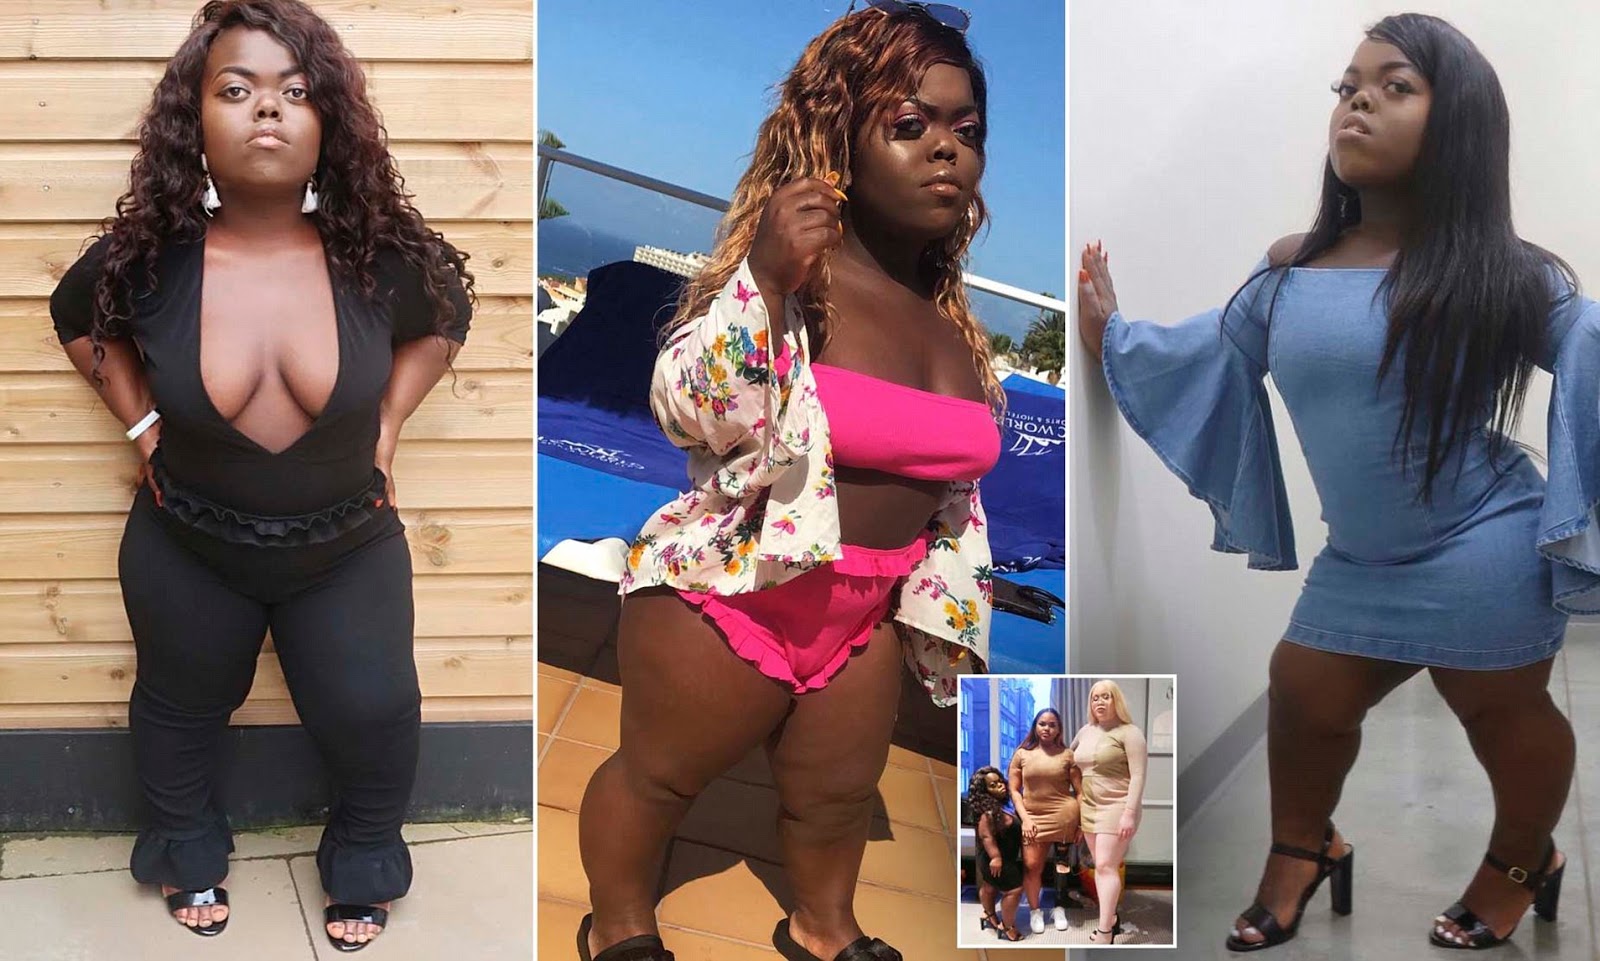 Fatima Timbo, 22, from London was born with dwarfism and stands at